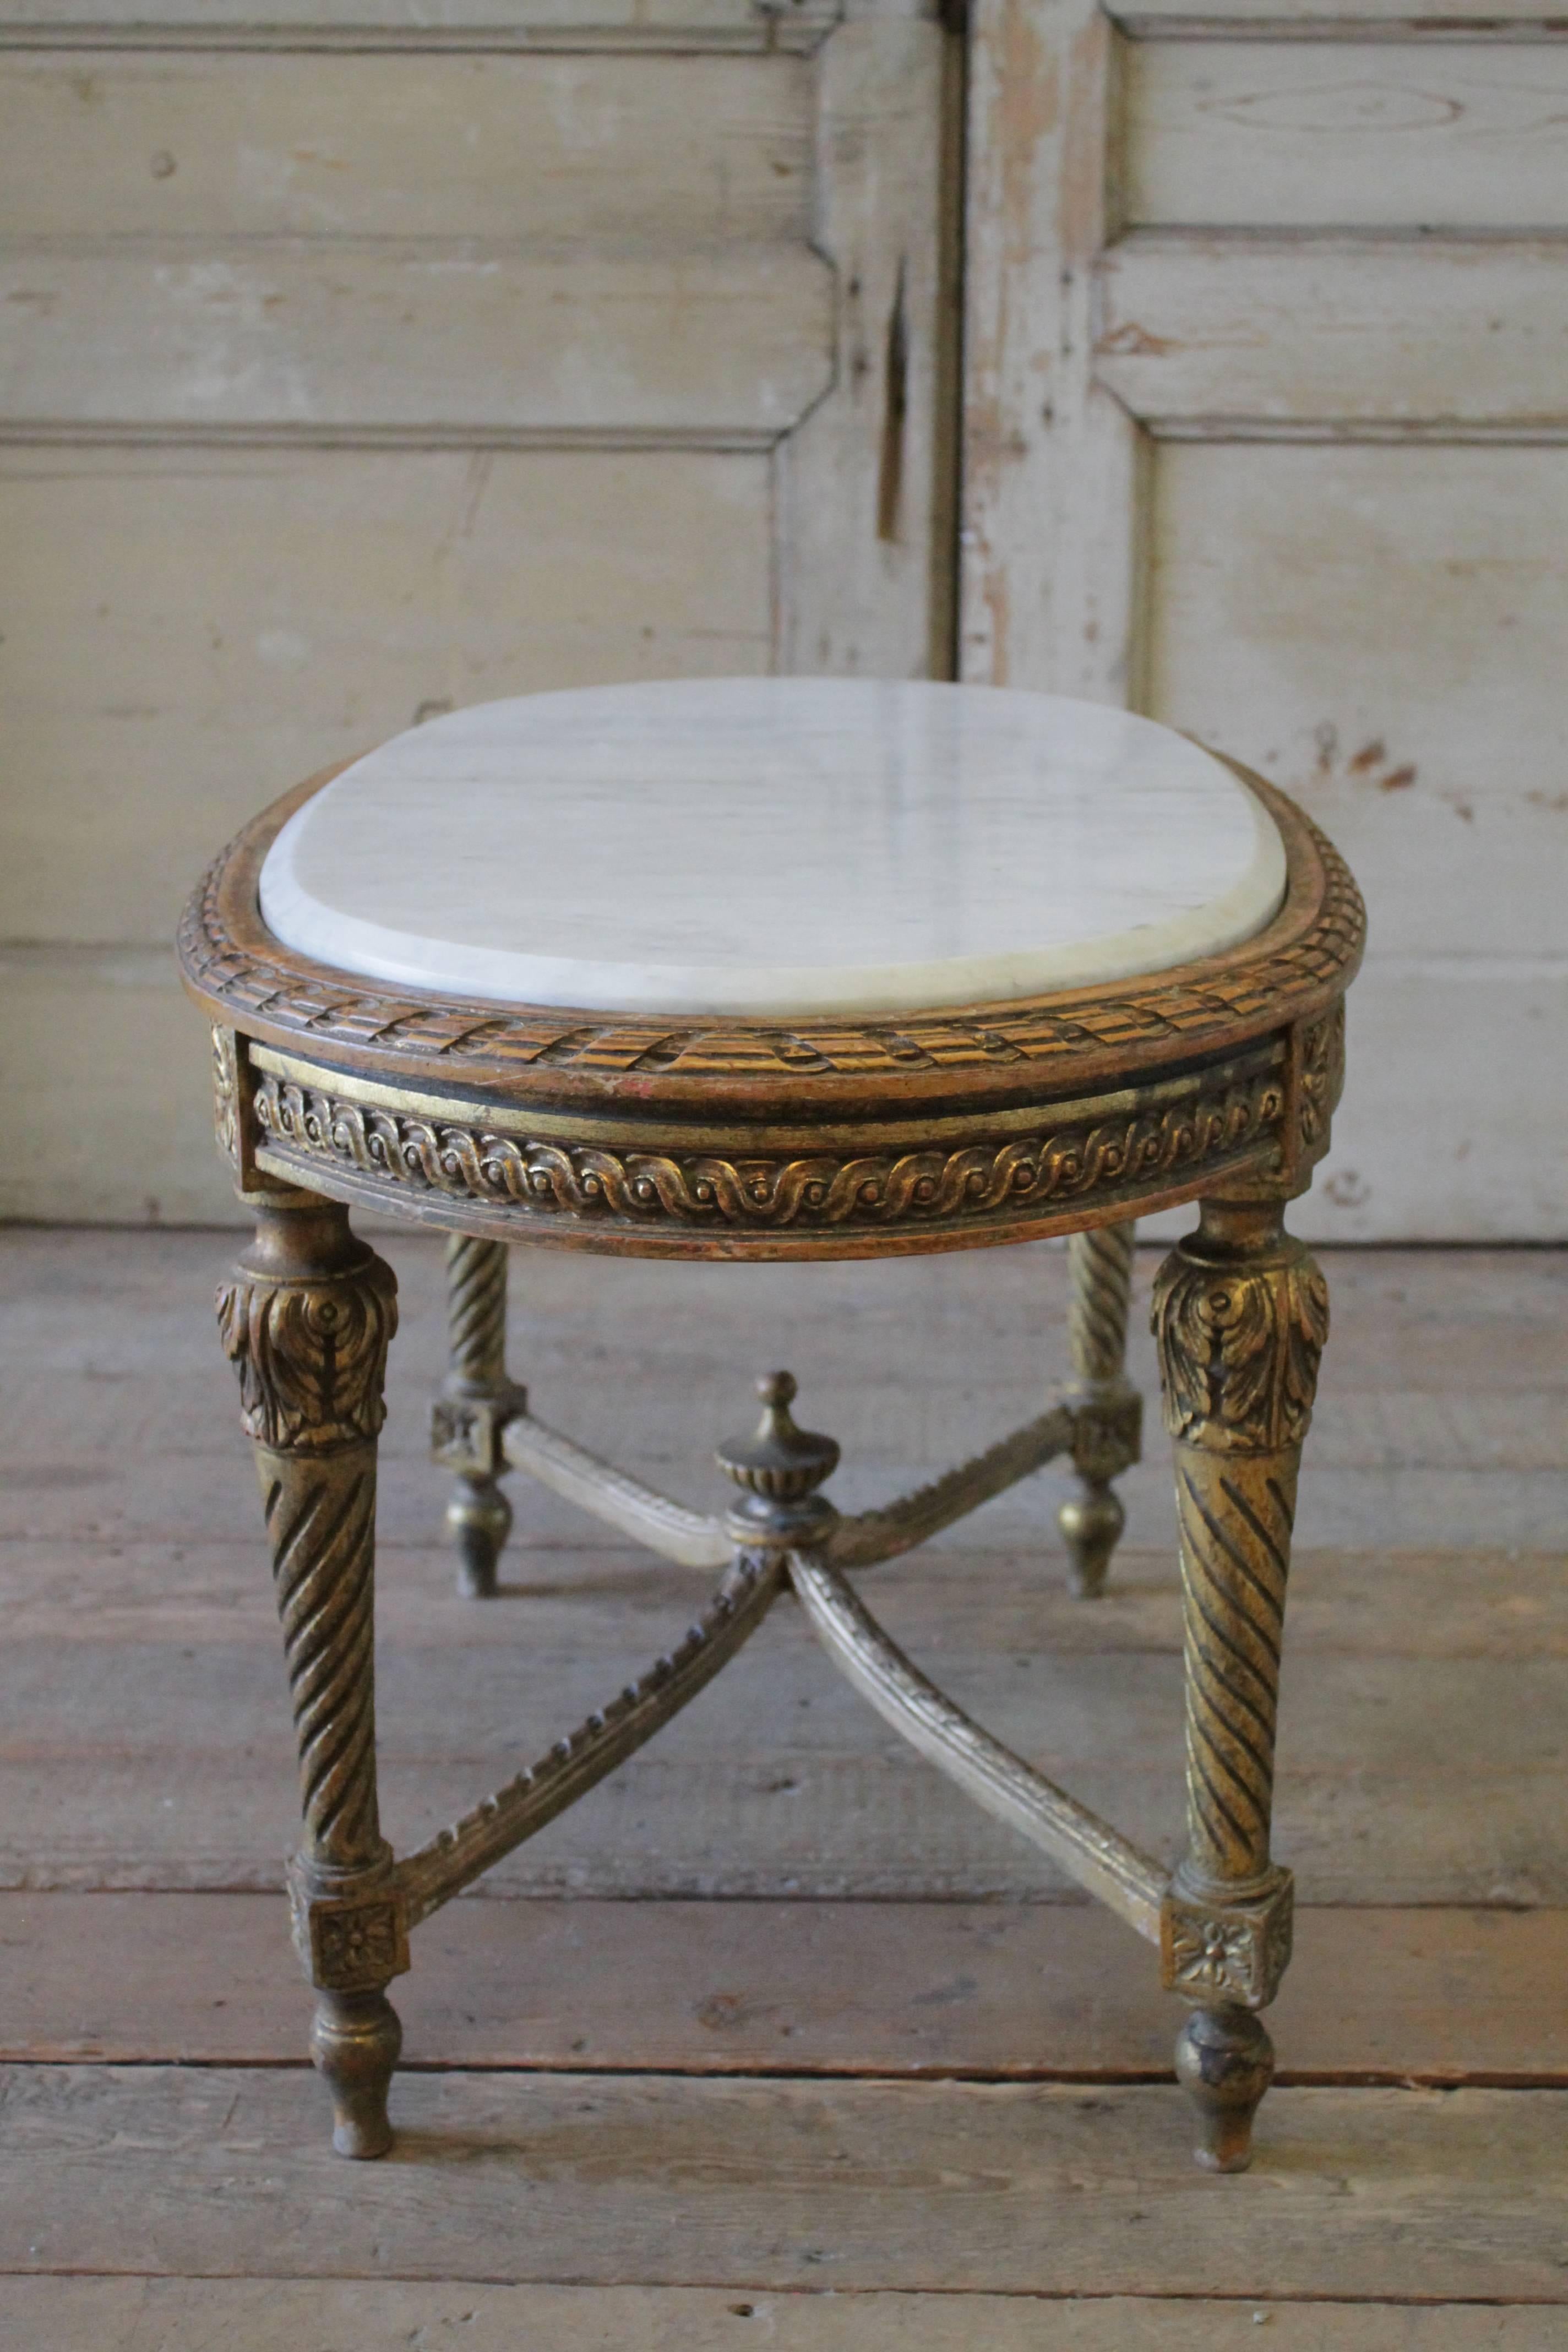 Beautiful antique French Louis XVI style coffee table has a weathered gilt finish. The white and grey vein marble top is in good condition with subtle signs of use.
The legs are sturdy, with a beautiful carved stretcher and carved finial base. A